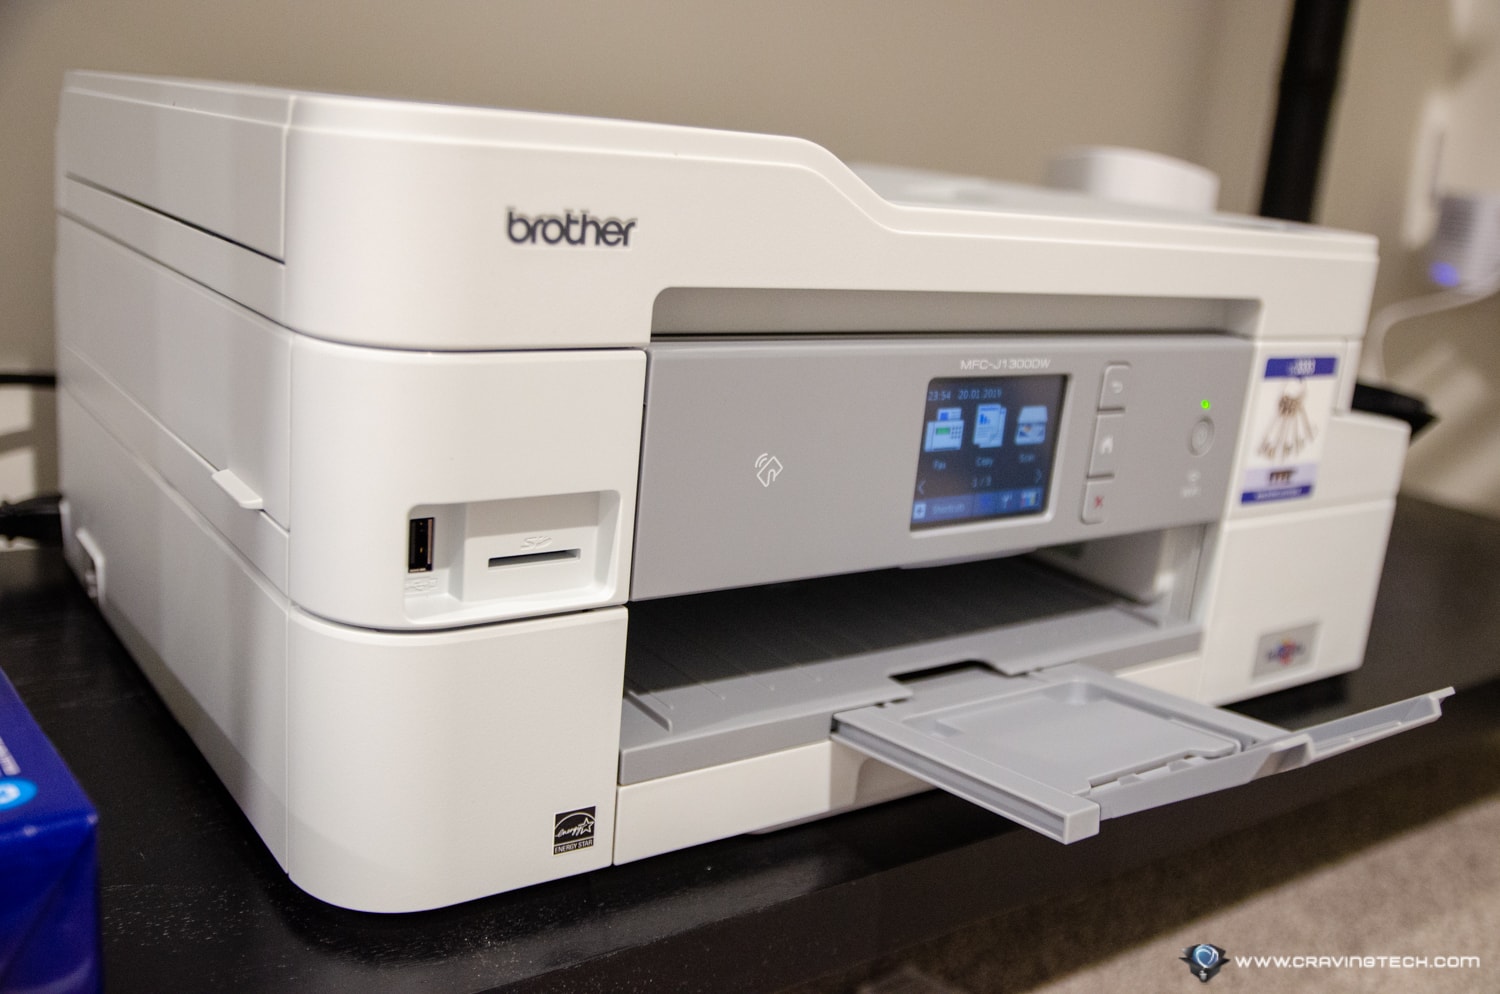 Brother MFC-J1300DW printer Review